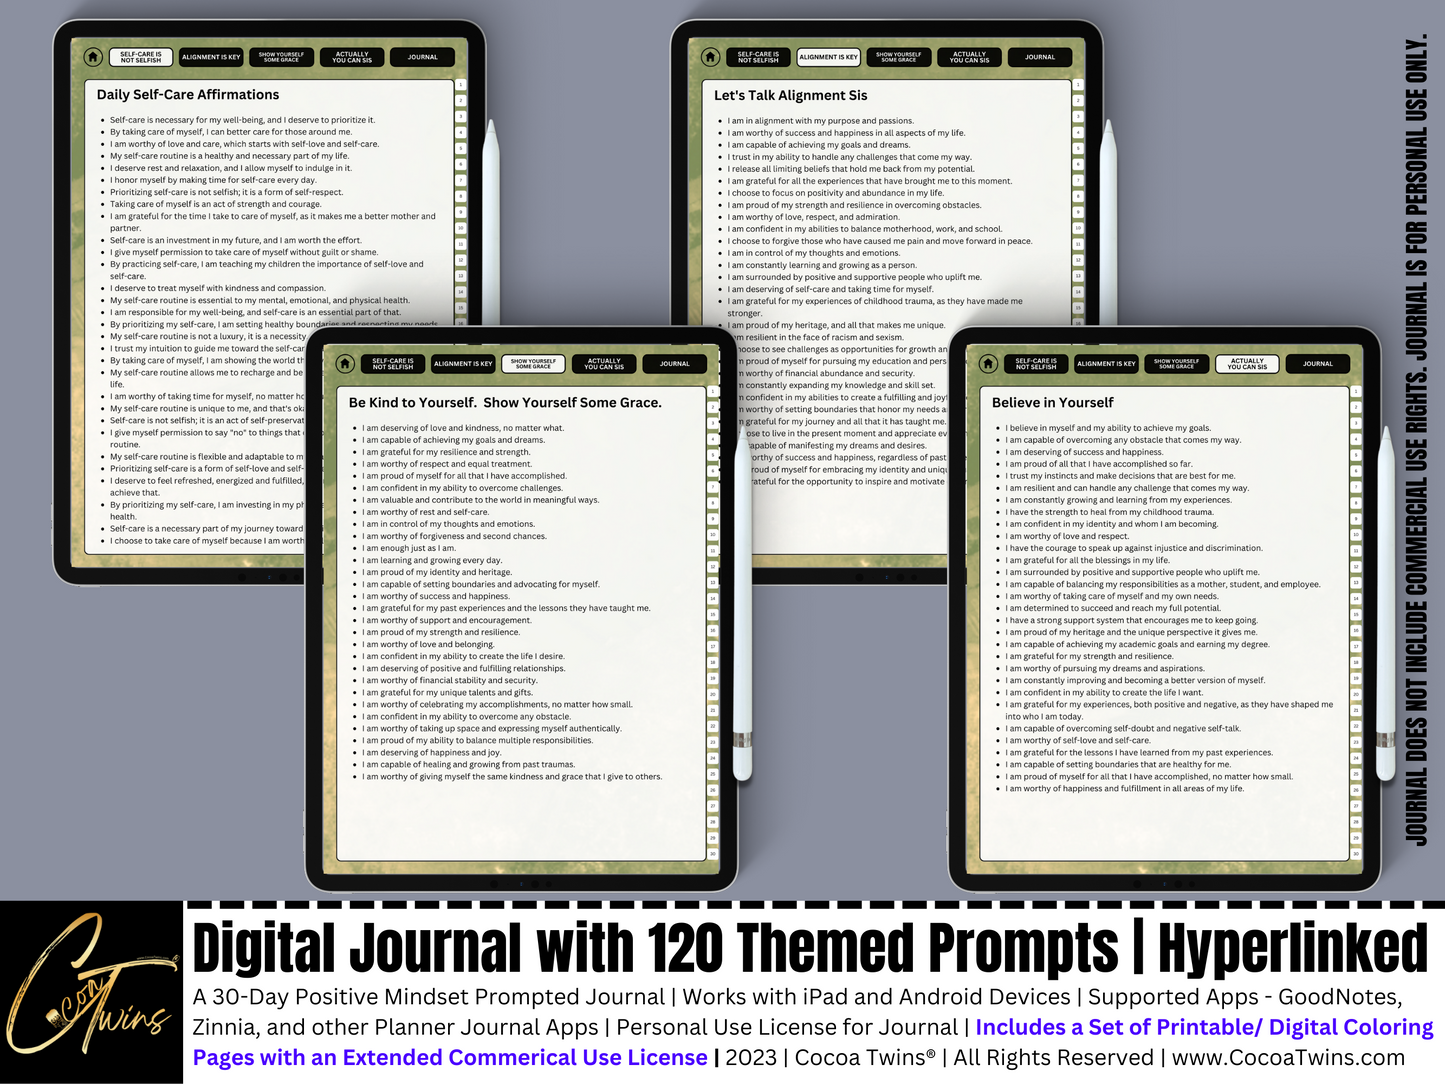 Mindset Matters - Alignment is Key | A Hyperlinked Digital Journal with 120 Themed Prompts